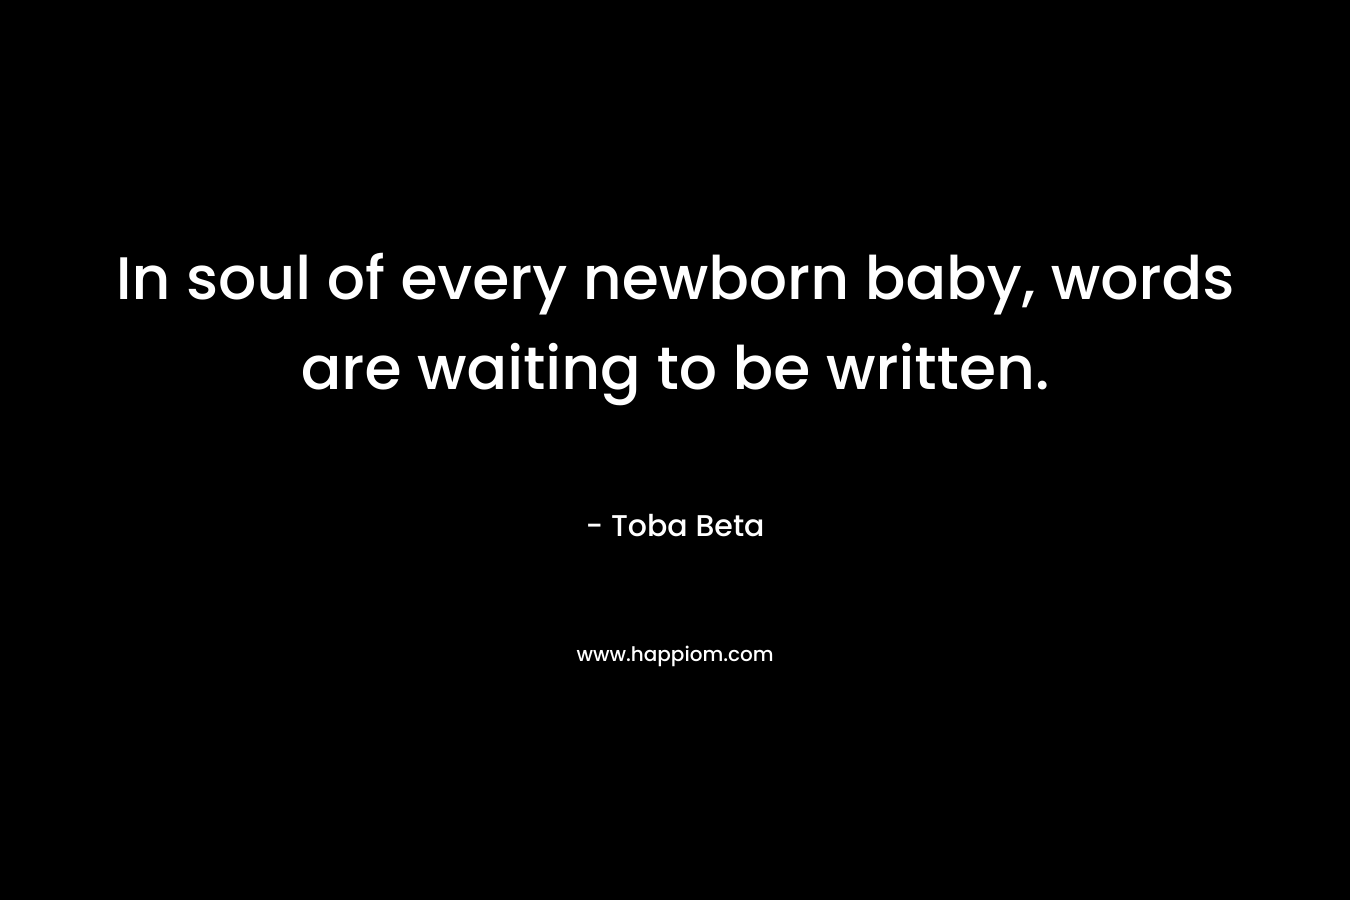 In soul of every newborn baby, words are waiting to be written.